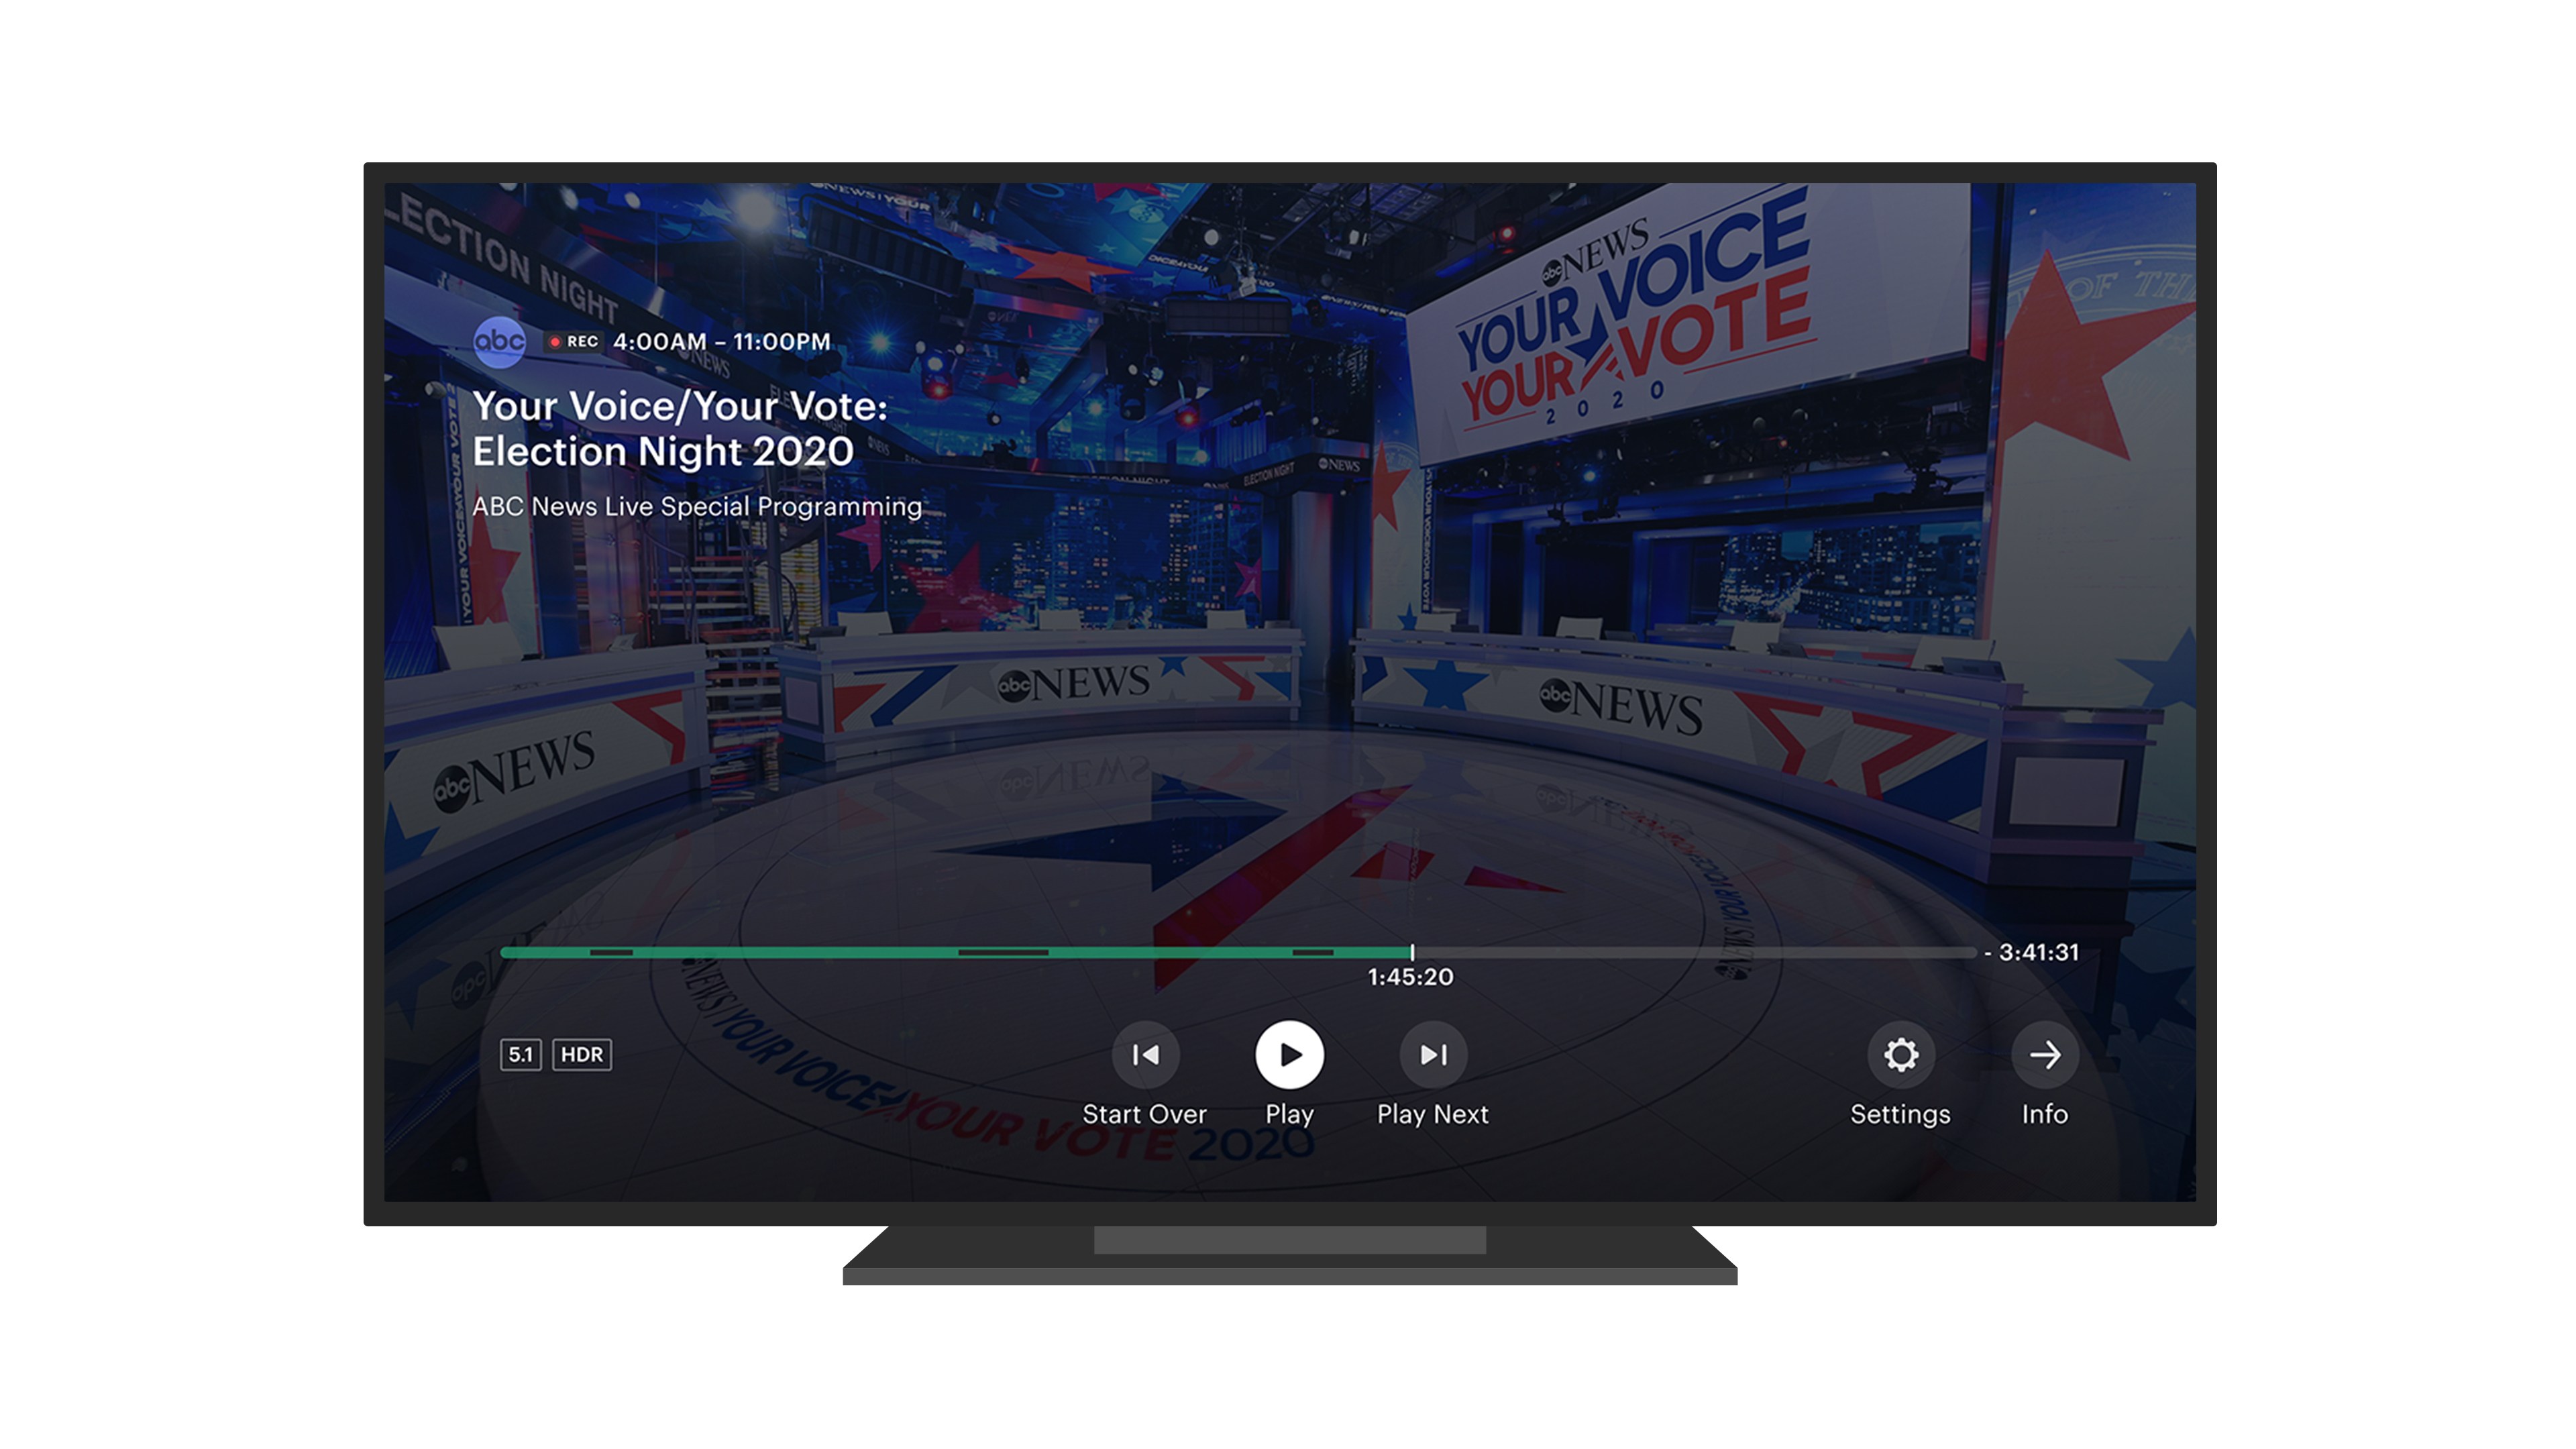 Hulu Breaks Records with Election Night 2020